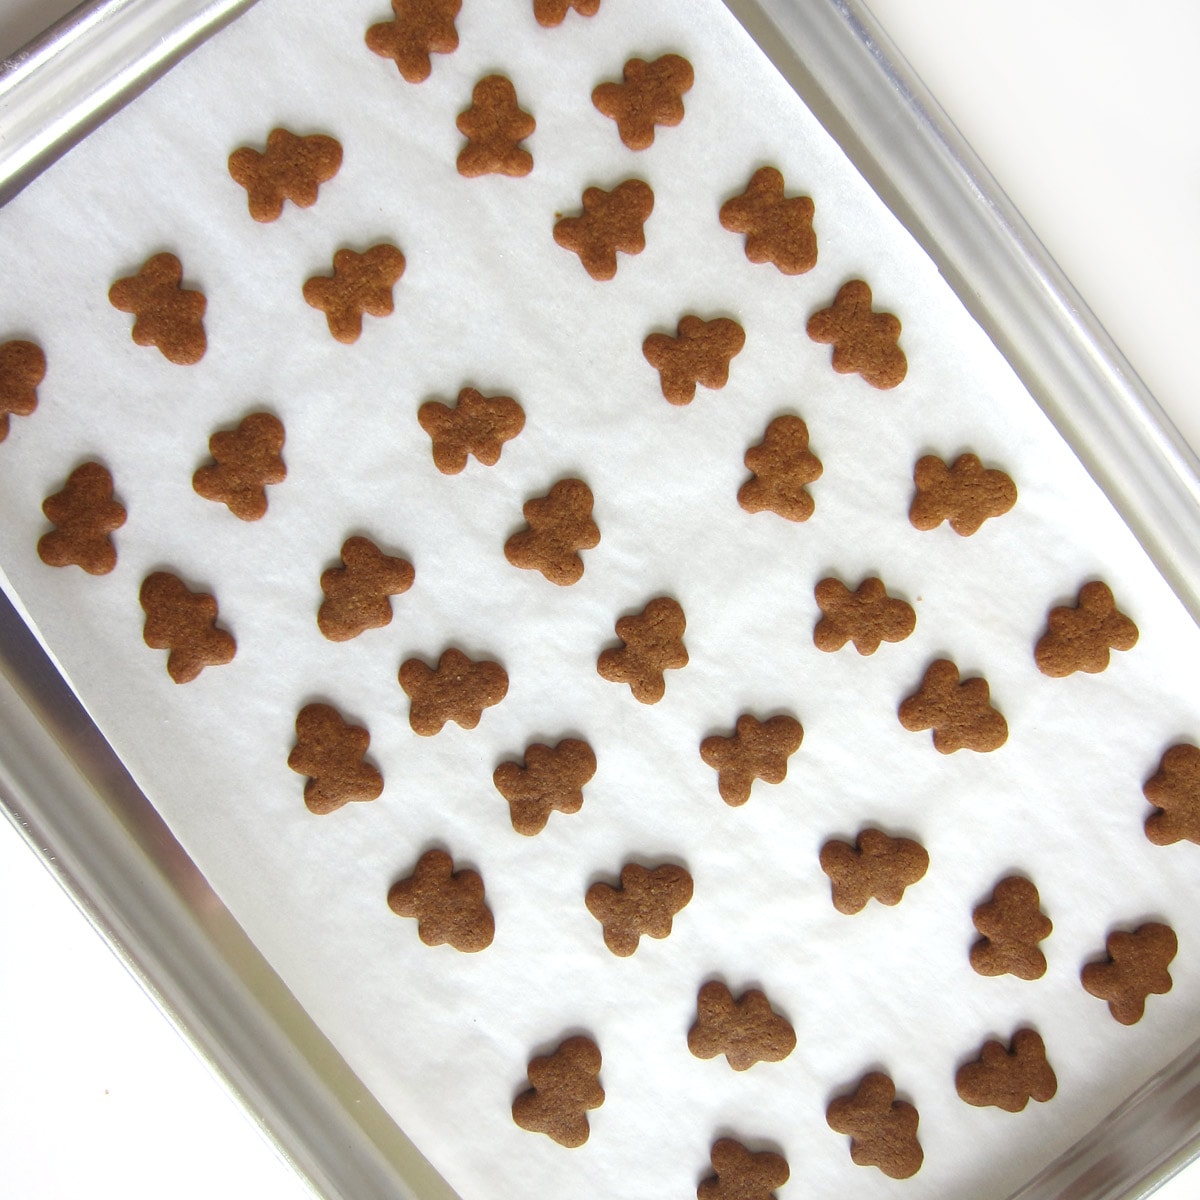 baked tiny gingerbread man cookies.